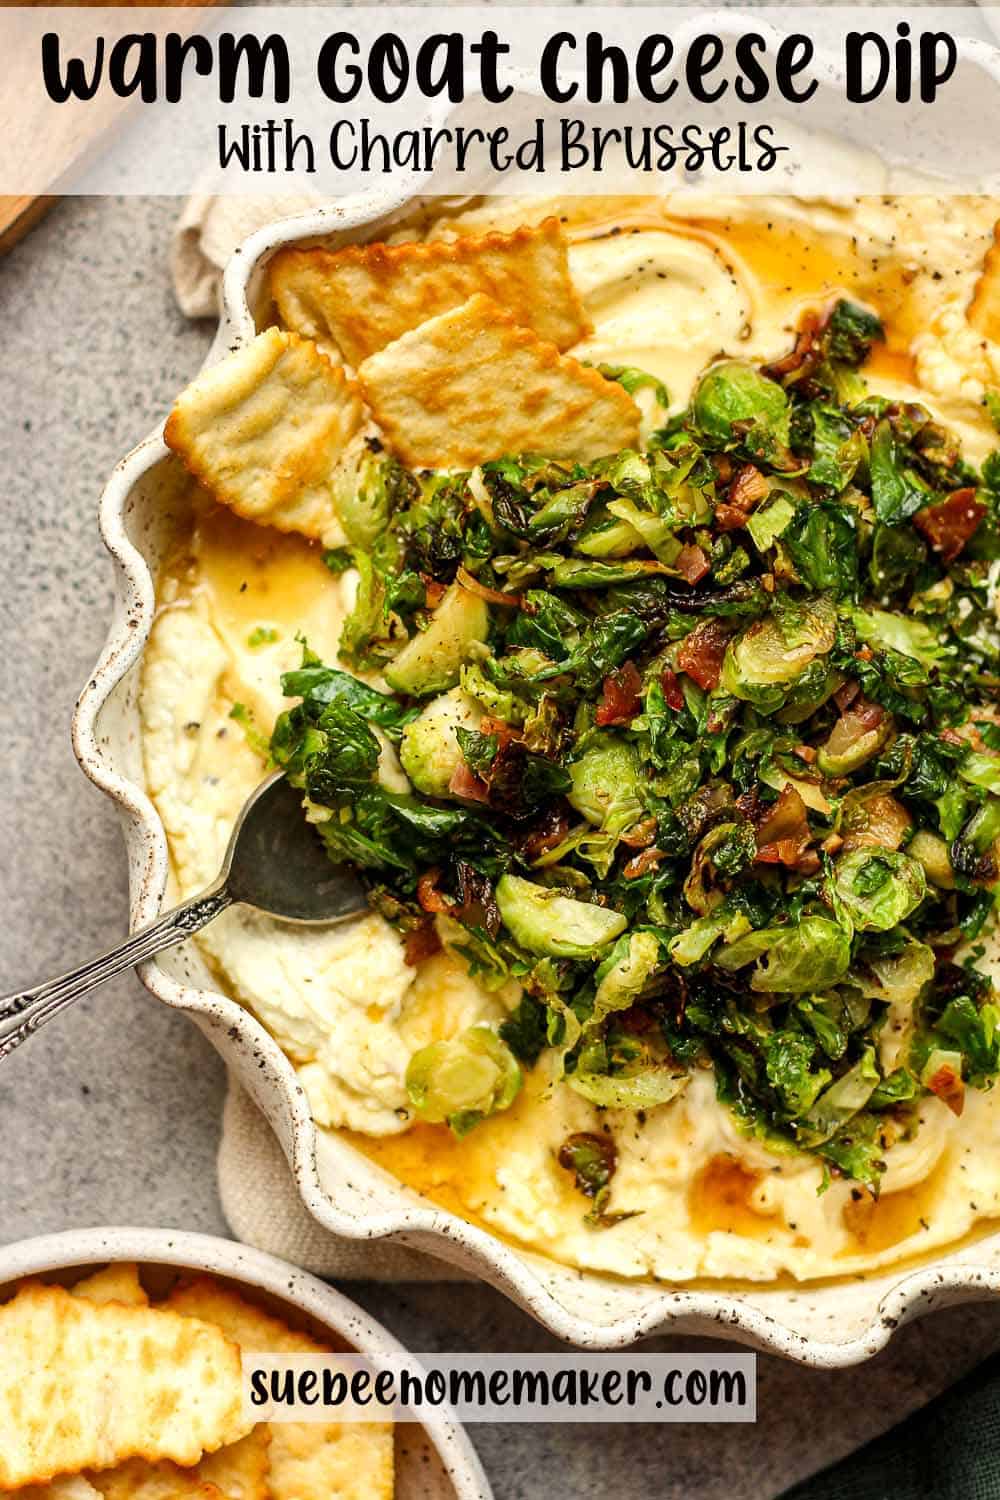 Closeup on a plate of warm goat cheese dip with charred brussels.